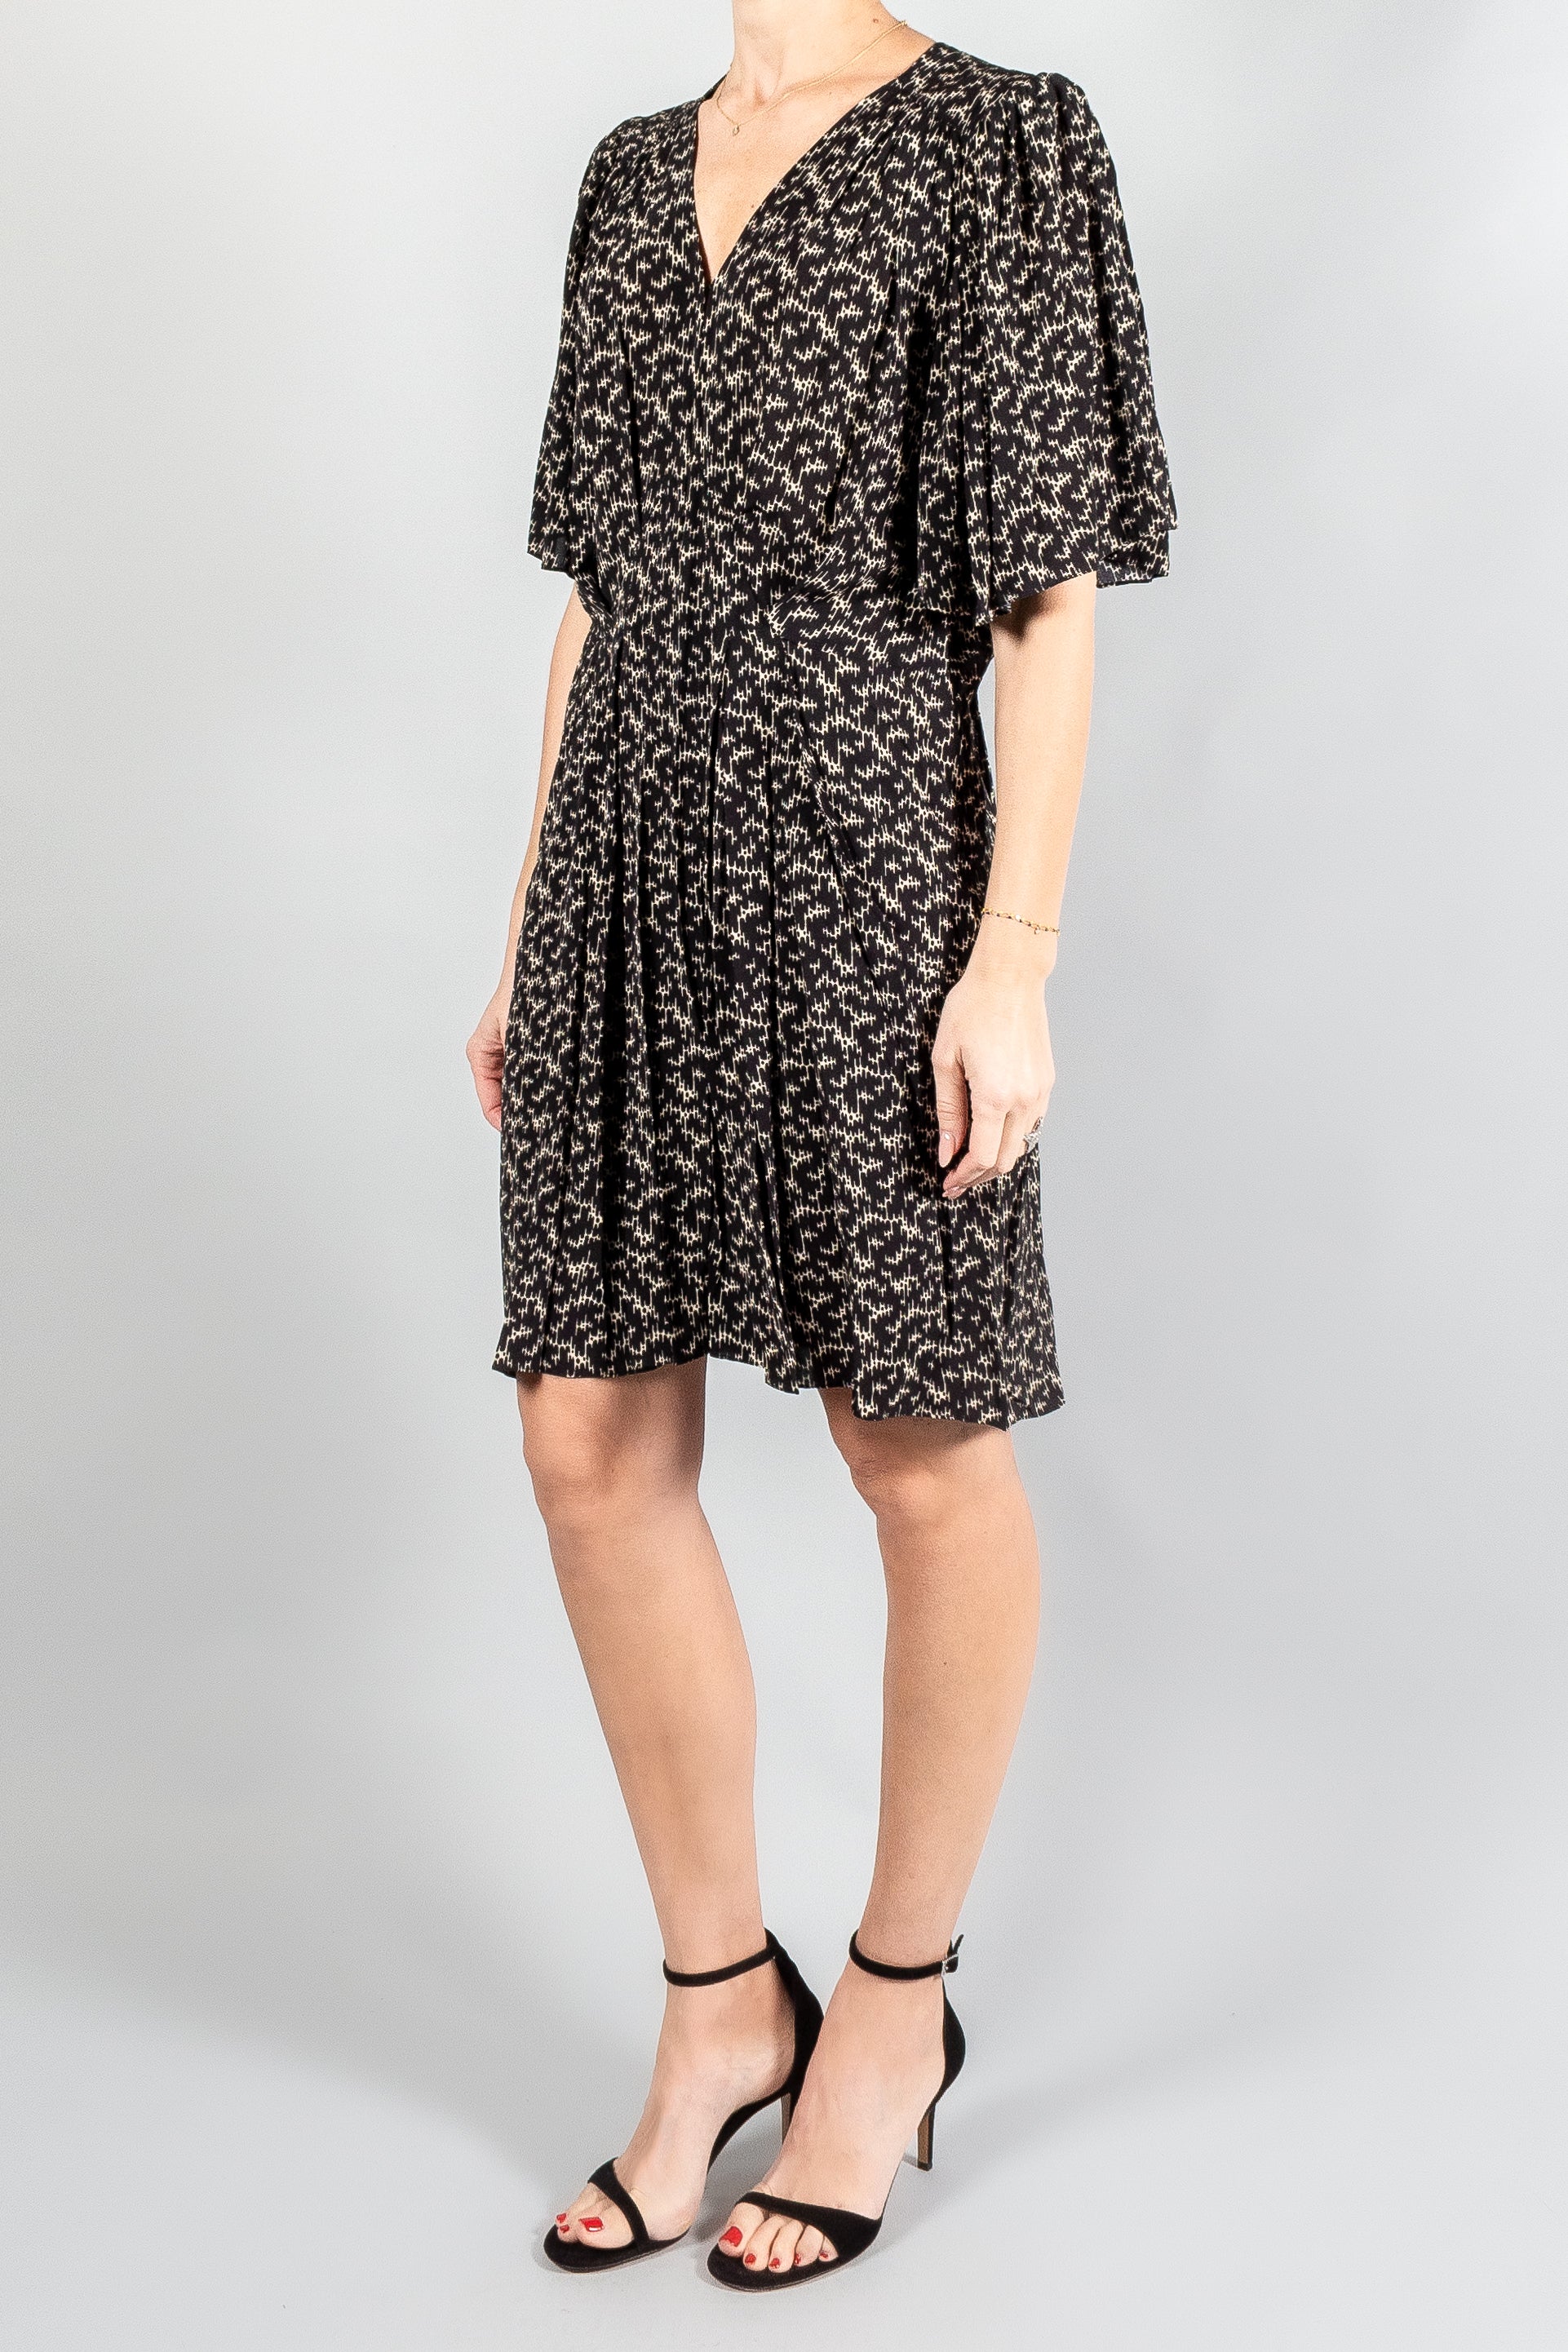 Isabel Marant Etoile Vedolia Dress-Dresses and Jumpsuits-Misch-Boutique-Vancouver-Canada-misch.ca